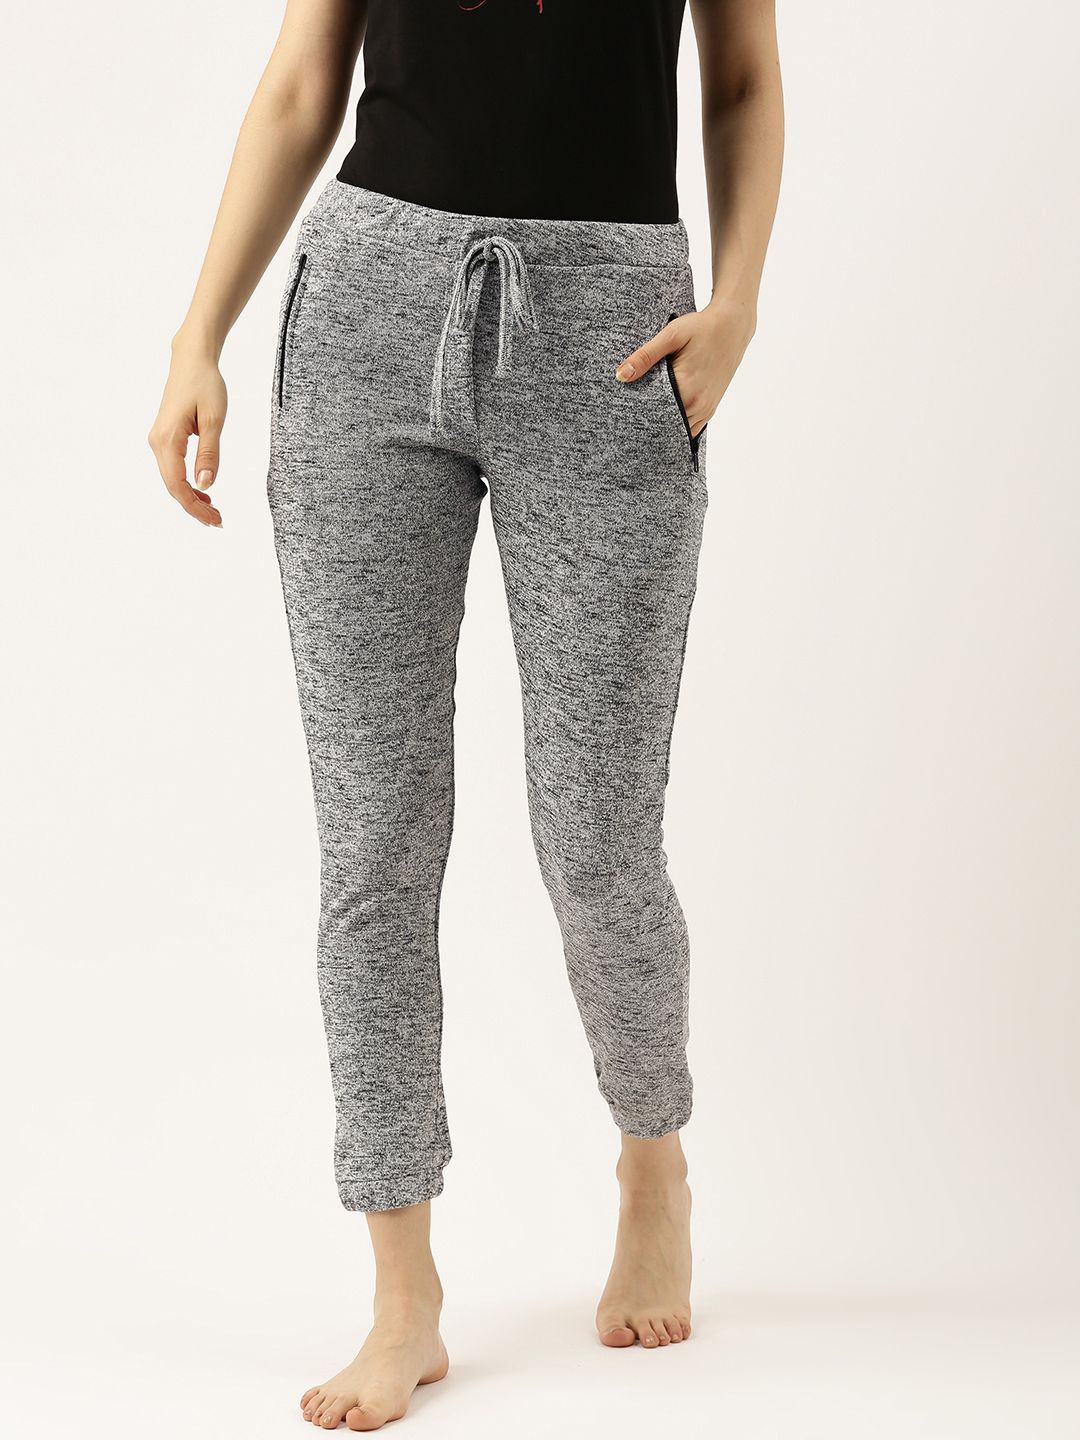 Clt.s Women Grey Self Design Slim Fit Lounge Joggers Price in India